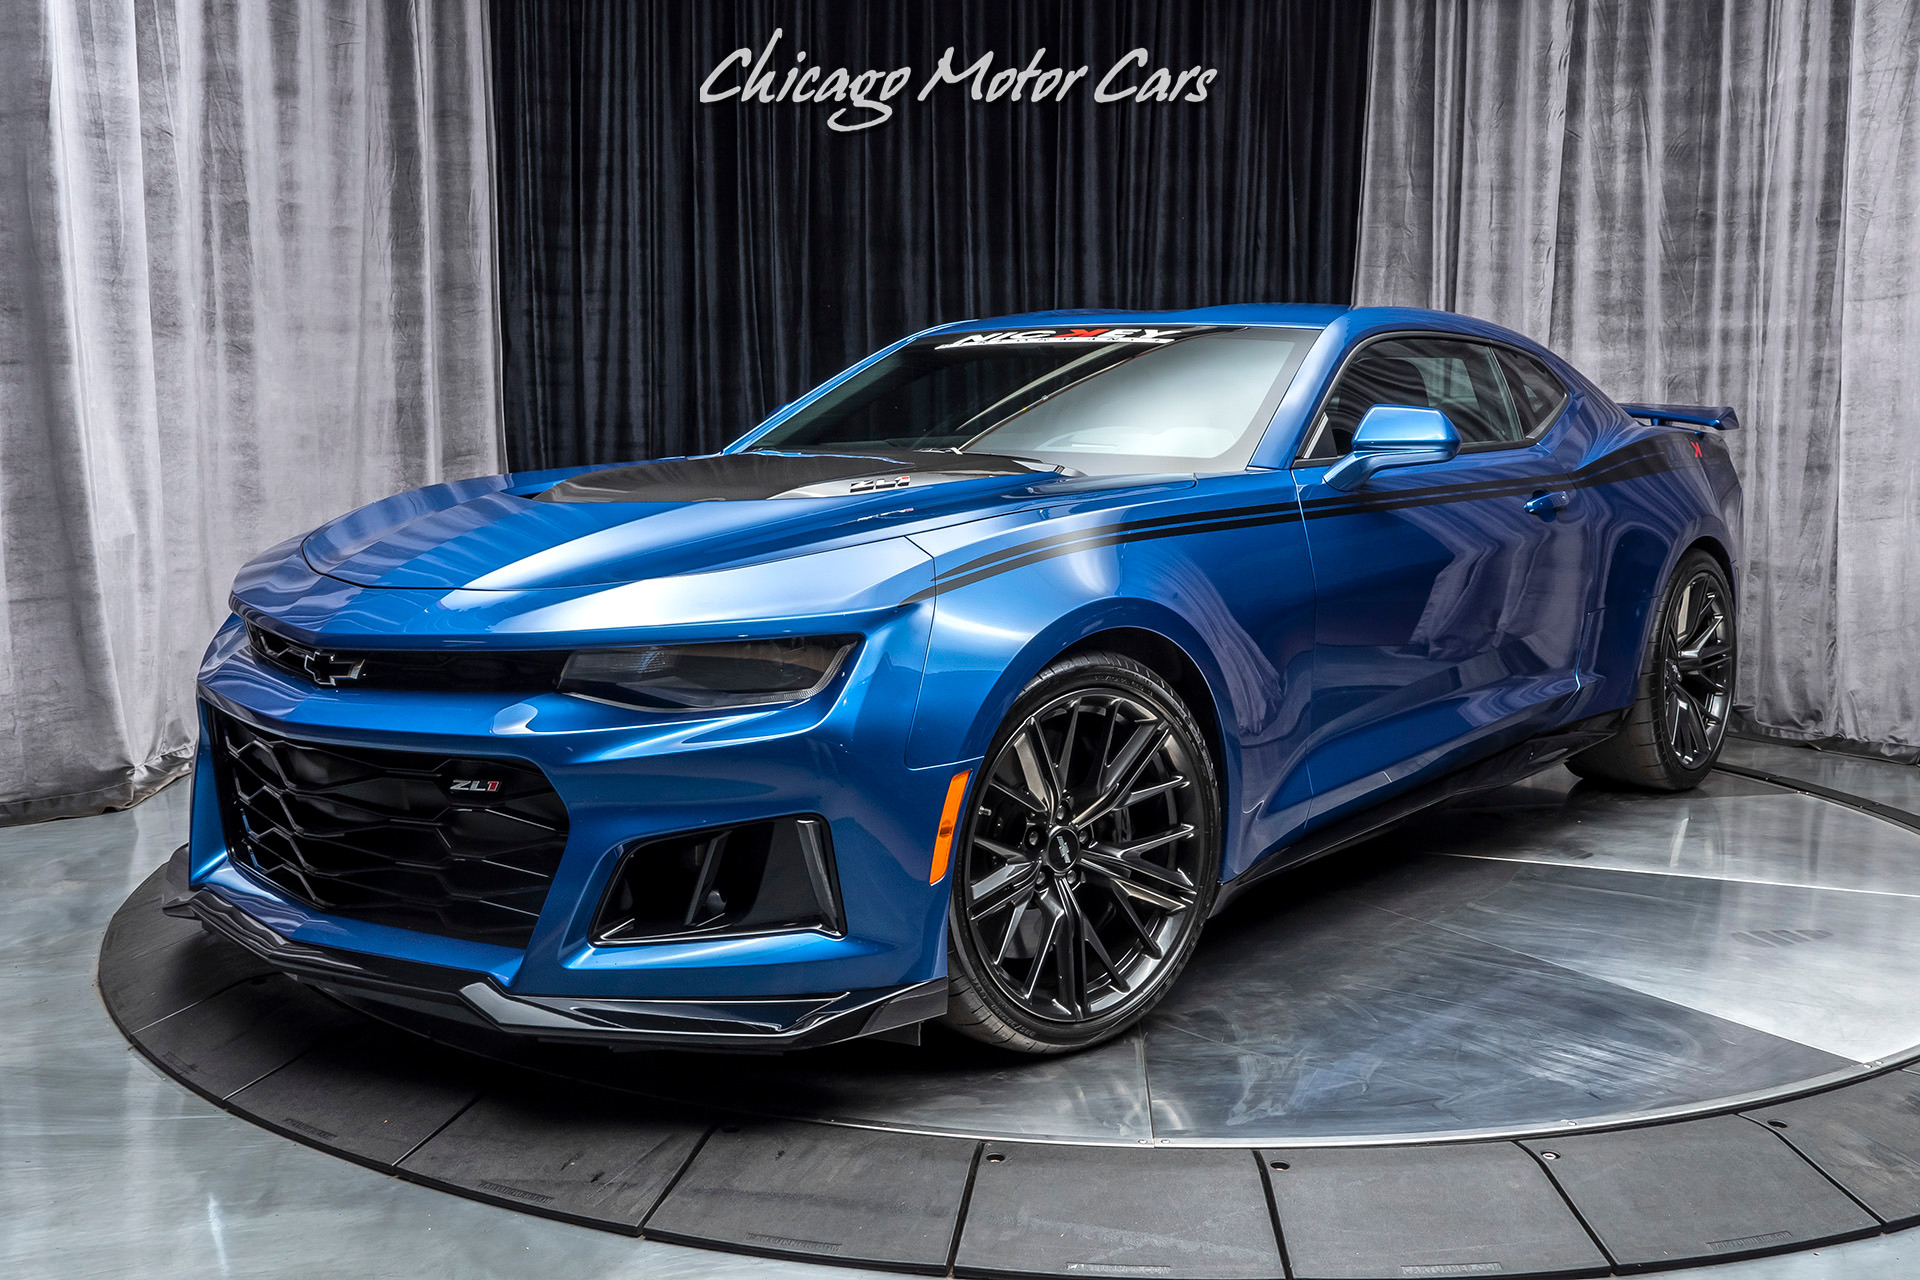 Used 2018 Chevrolet Camaro Zl1 Coupe Nickey Performance Stage 1